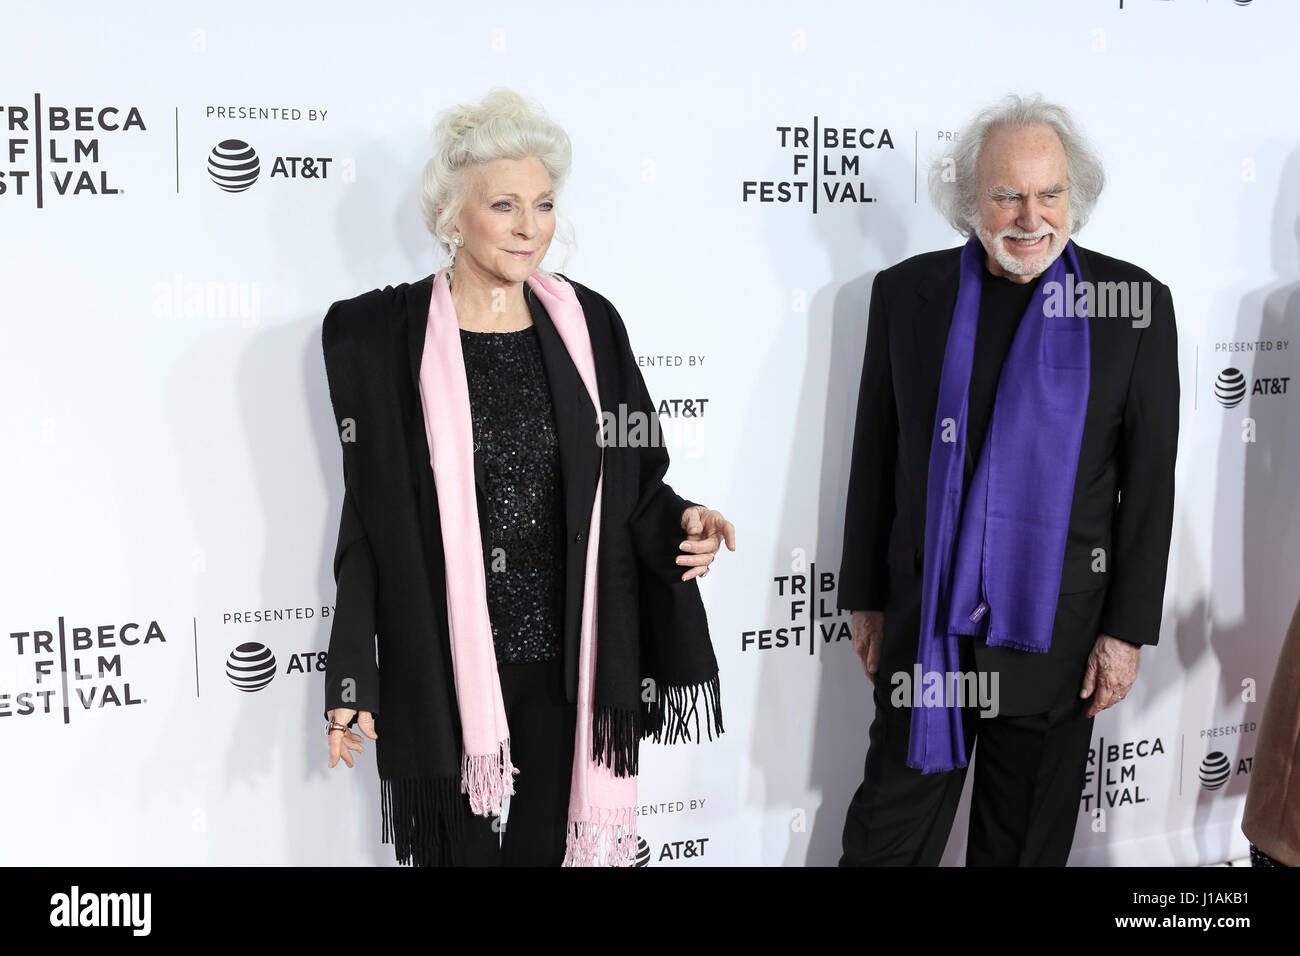 New York, USA. 19. April 2017. Judy Collins kommt auf dem Tribeca Film Festival Opening Night, Clive Davis: The Soundtrack Of Our lebt Credit: The Foto Zugang/Alamy Live News Stockfoto